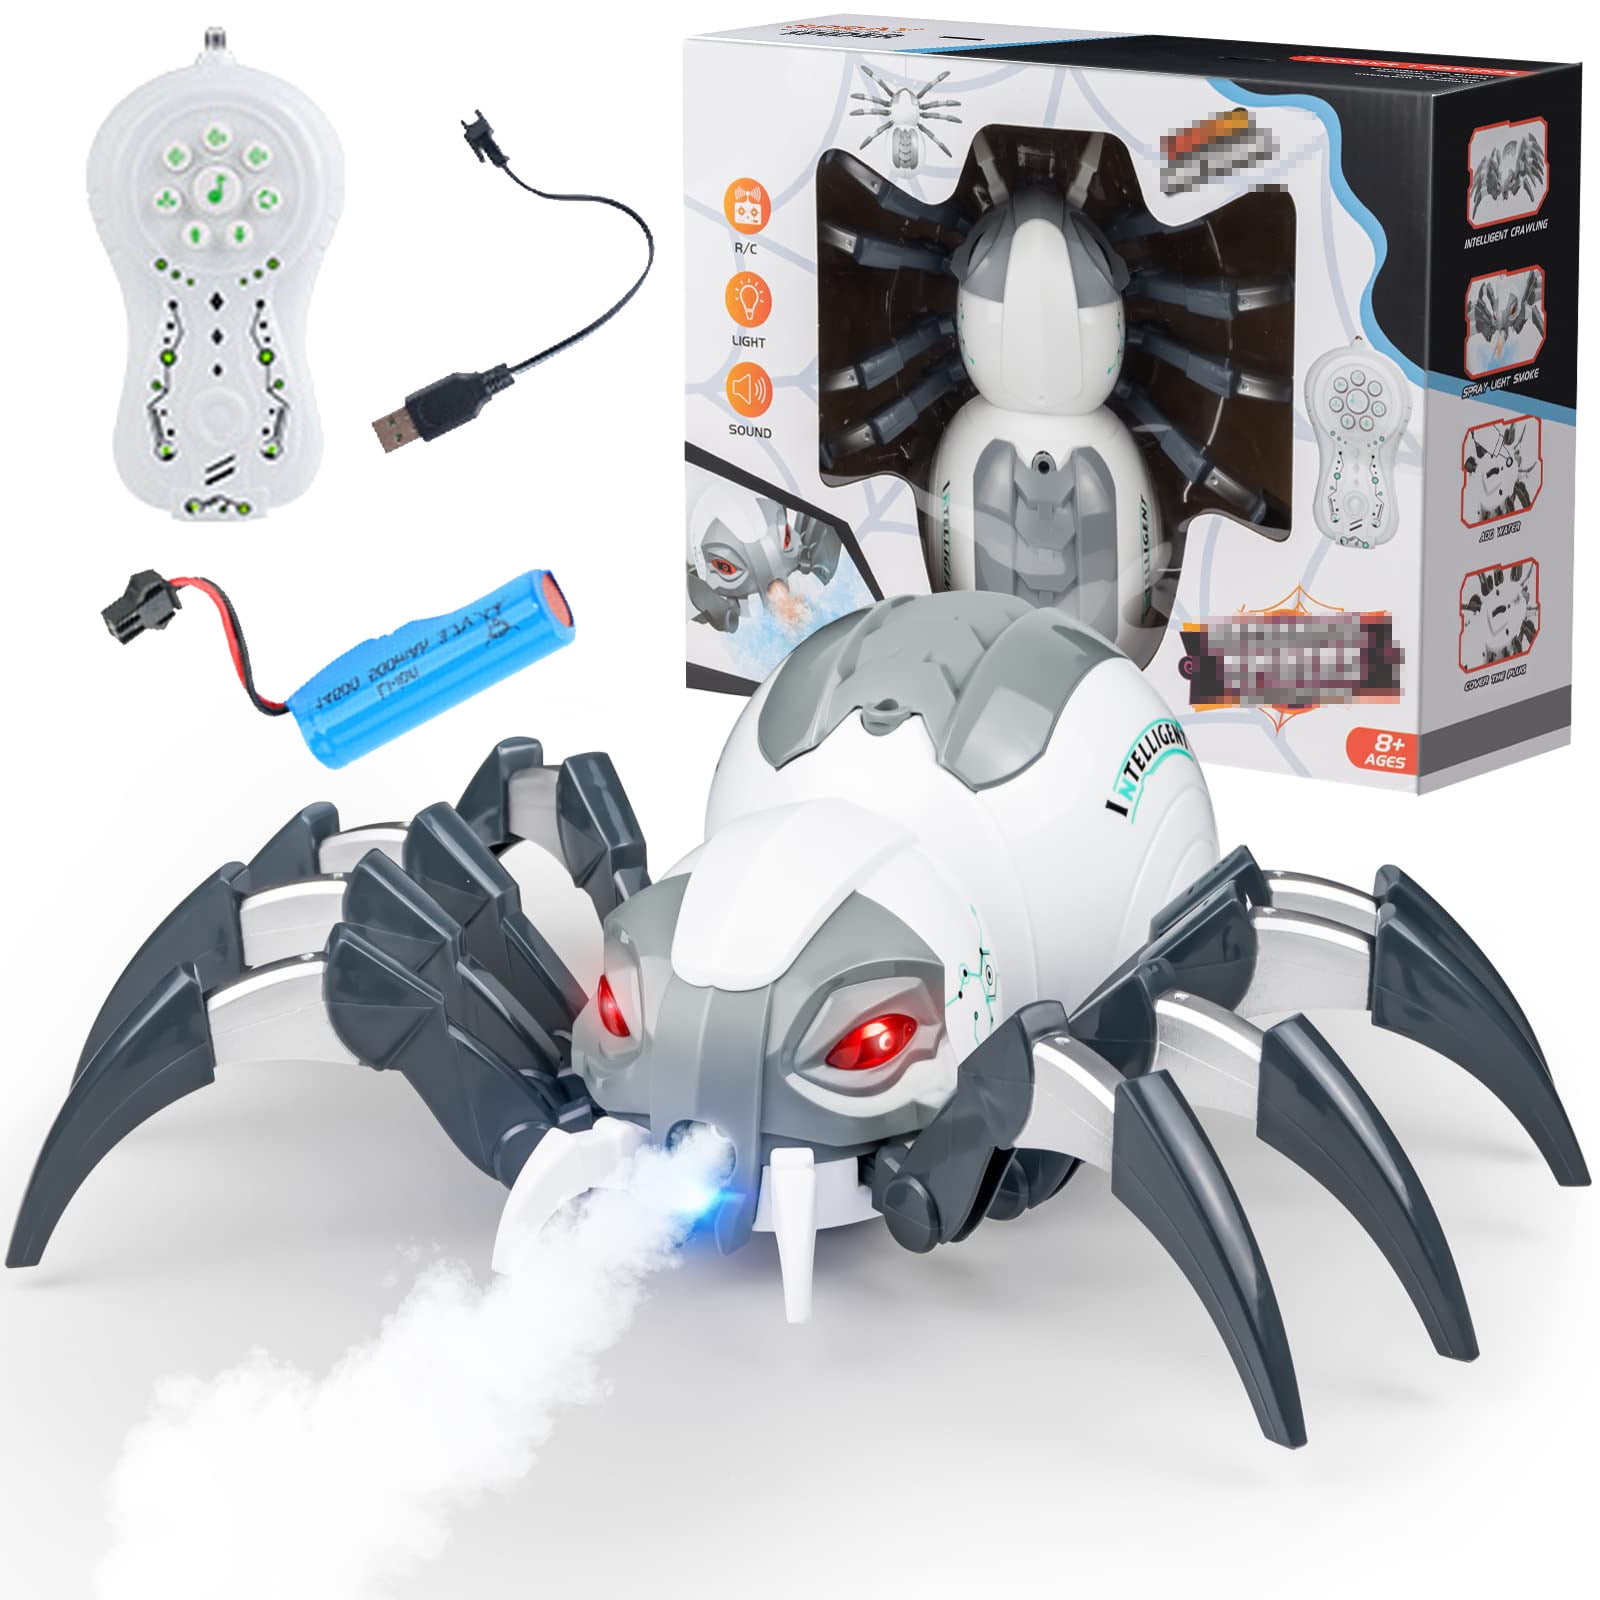 Remote Control Spider Robot, RC Spider Toys with Light/Music/One-Key Demo, Robot Toys for Kids 3-5 5-7, Birthday Gifts for 3 4 5 6 7 8 9 10-12 Years Old Boys Girls Christmas Stocking Stuffers - Walmart.com